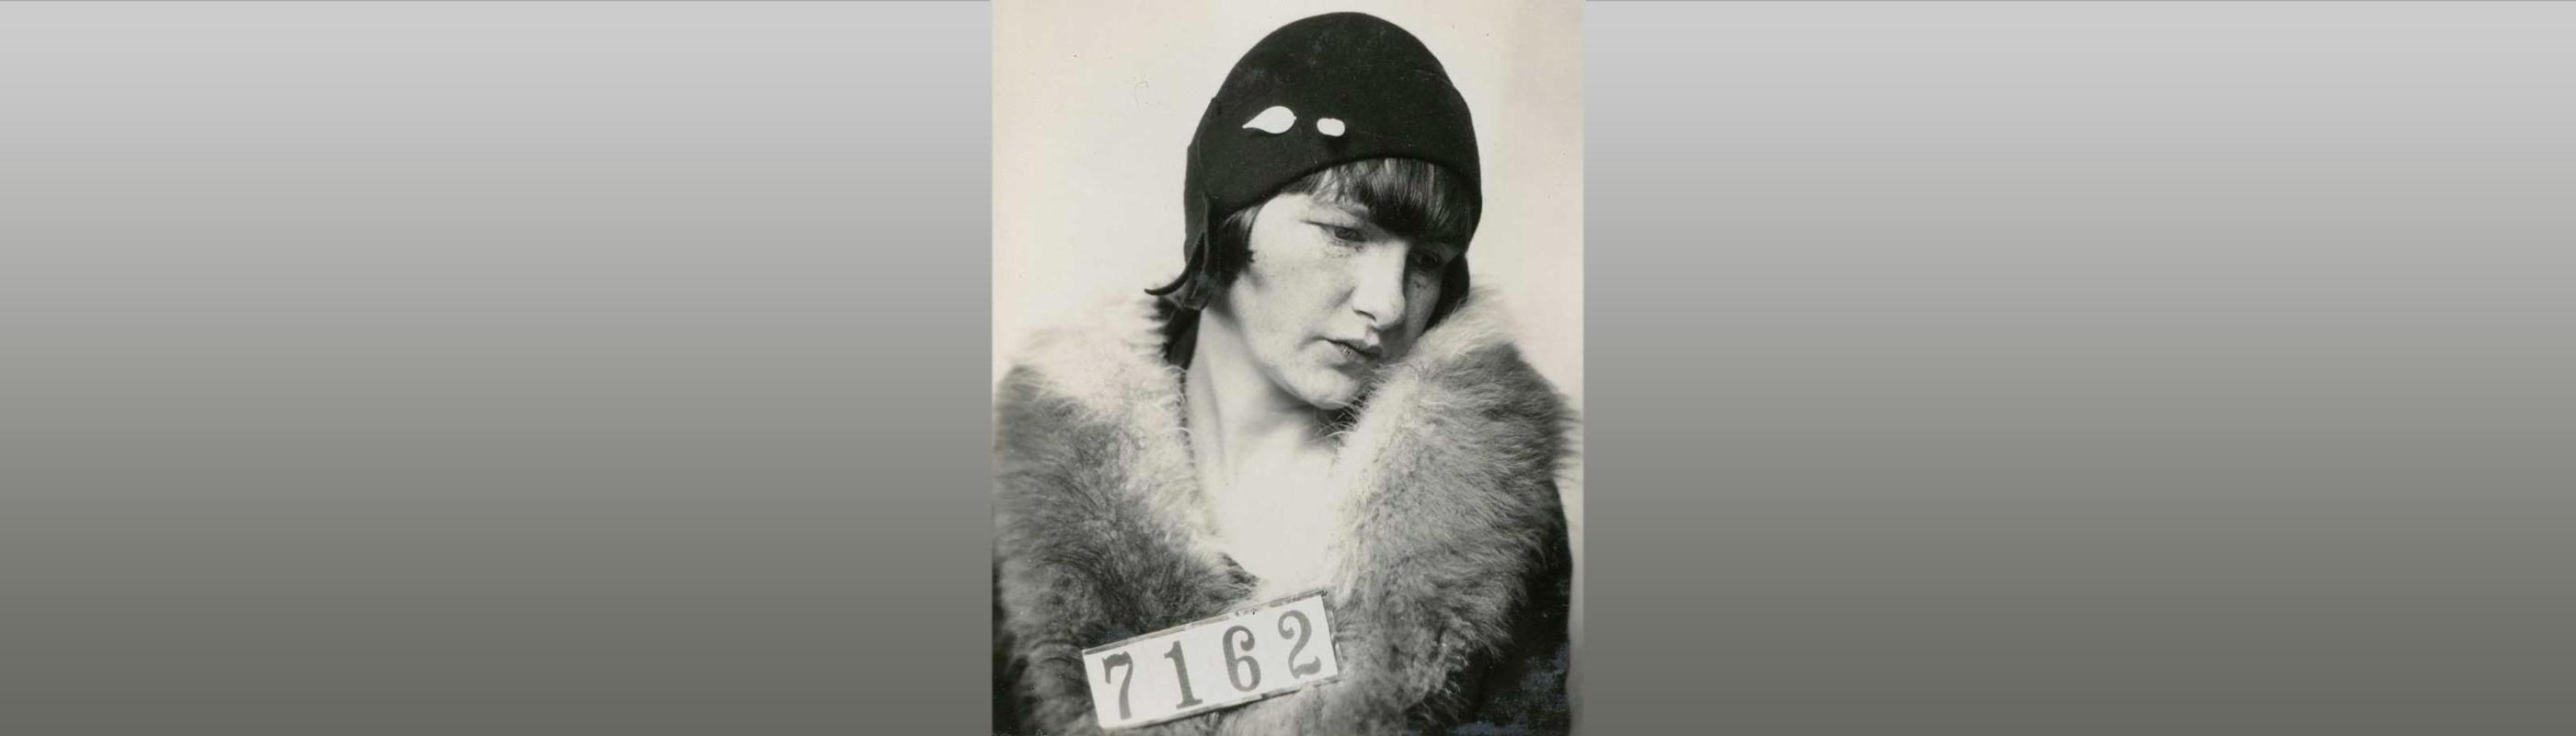 Police photo of woman